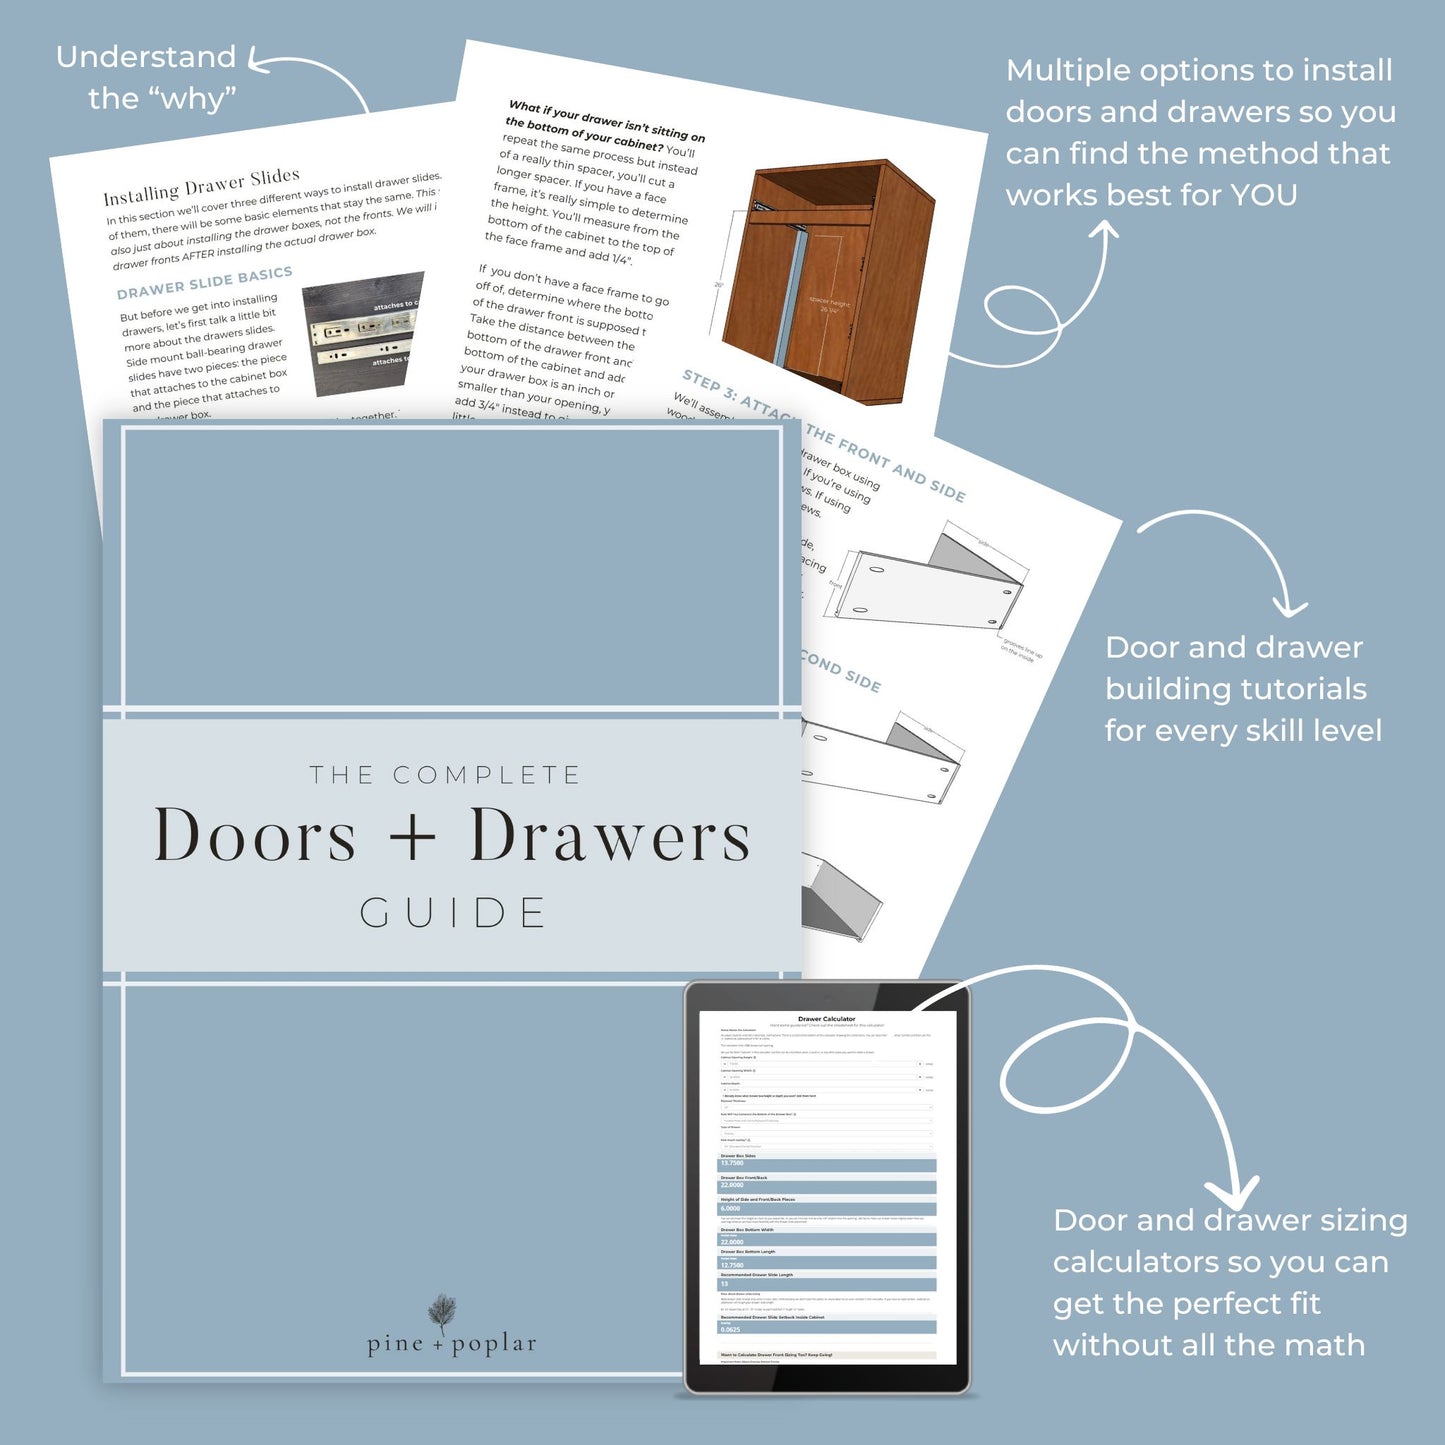 The Doors and Drawers Guide